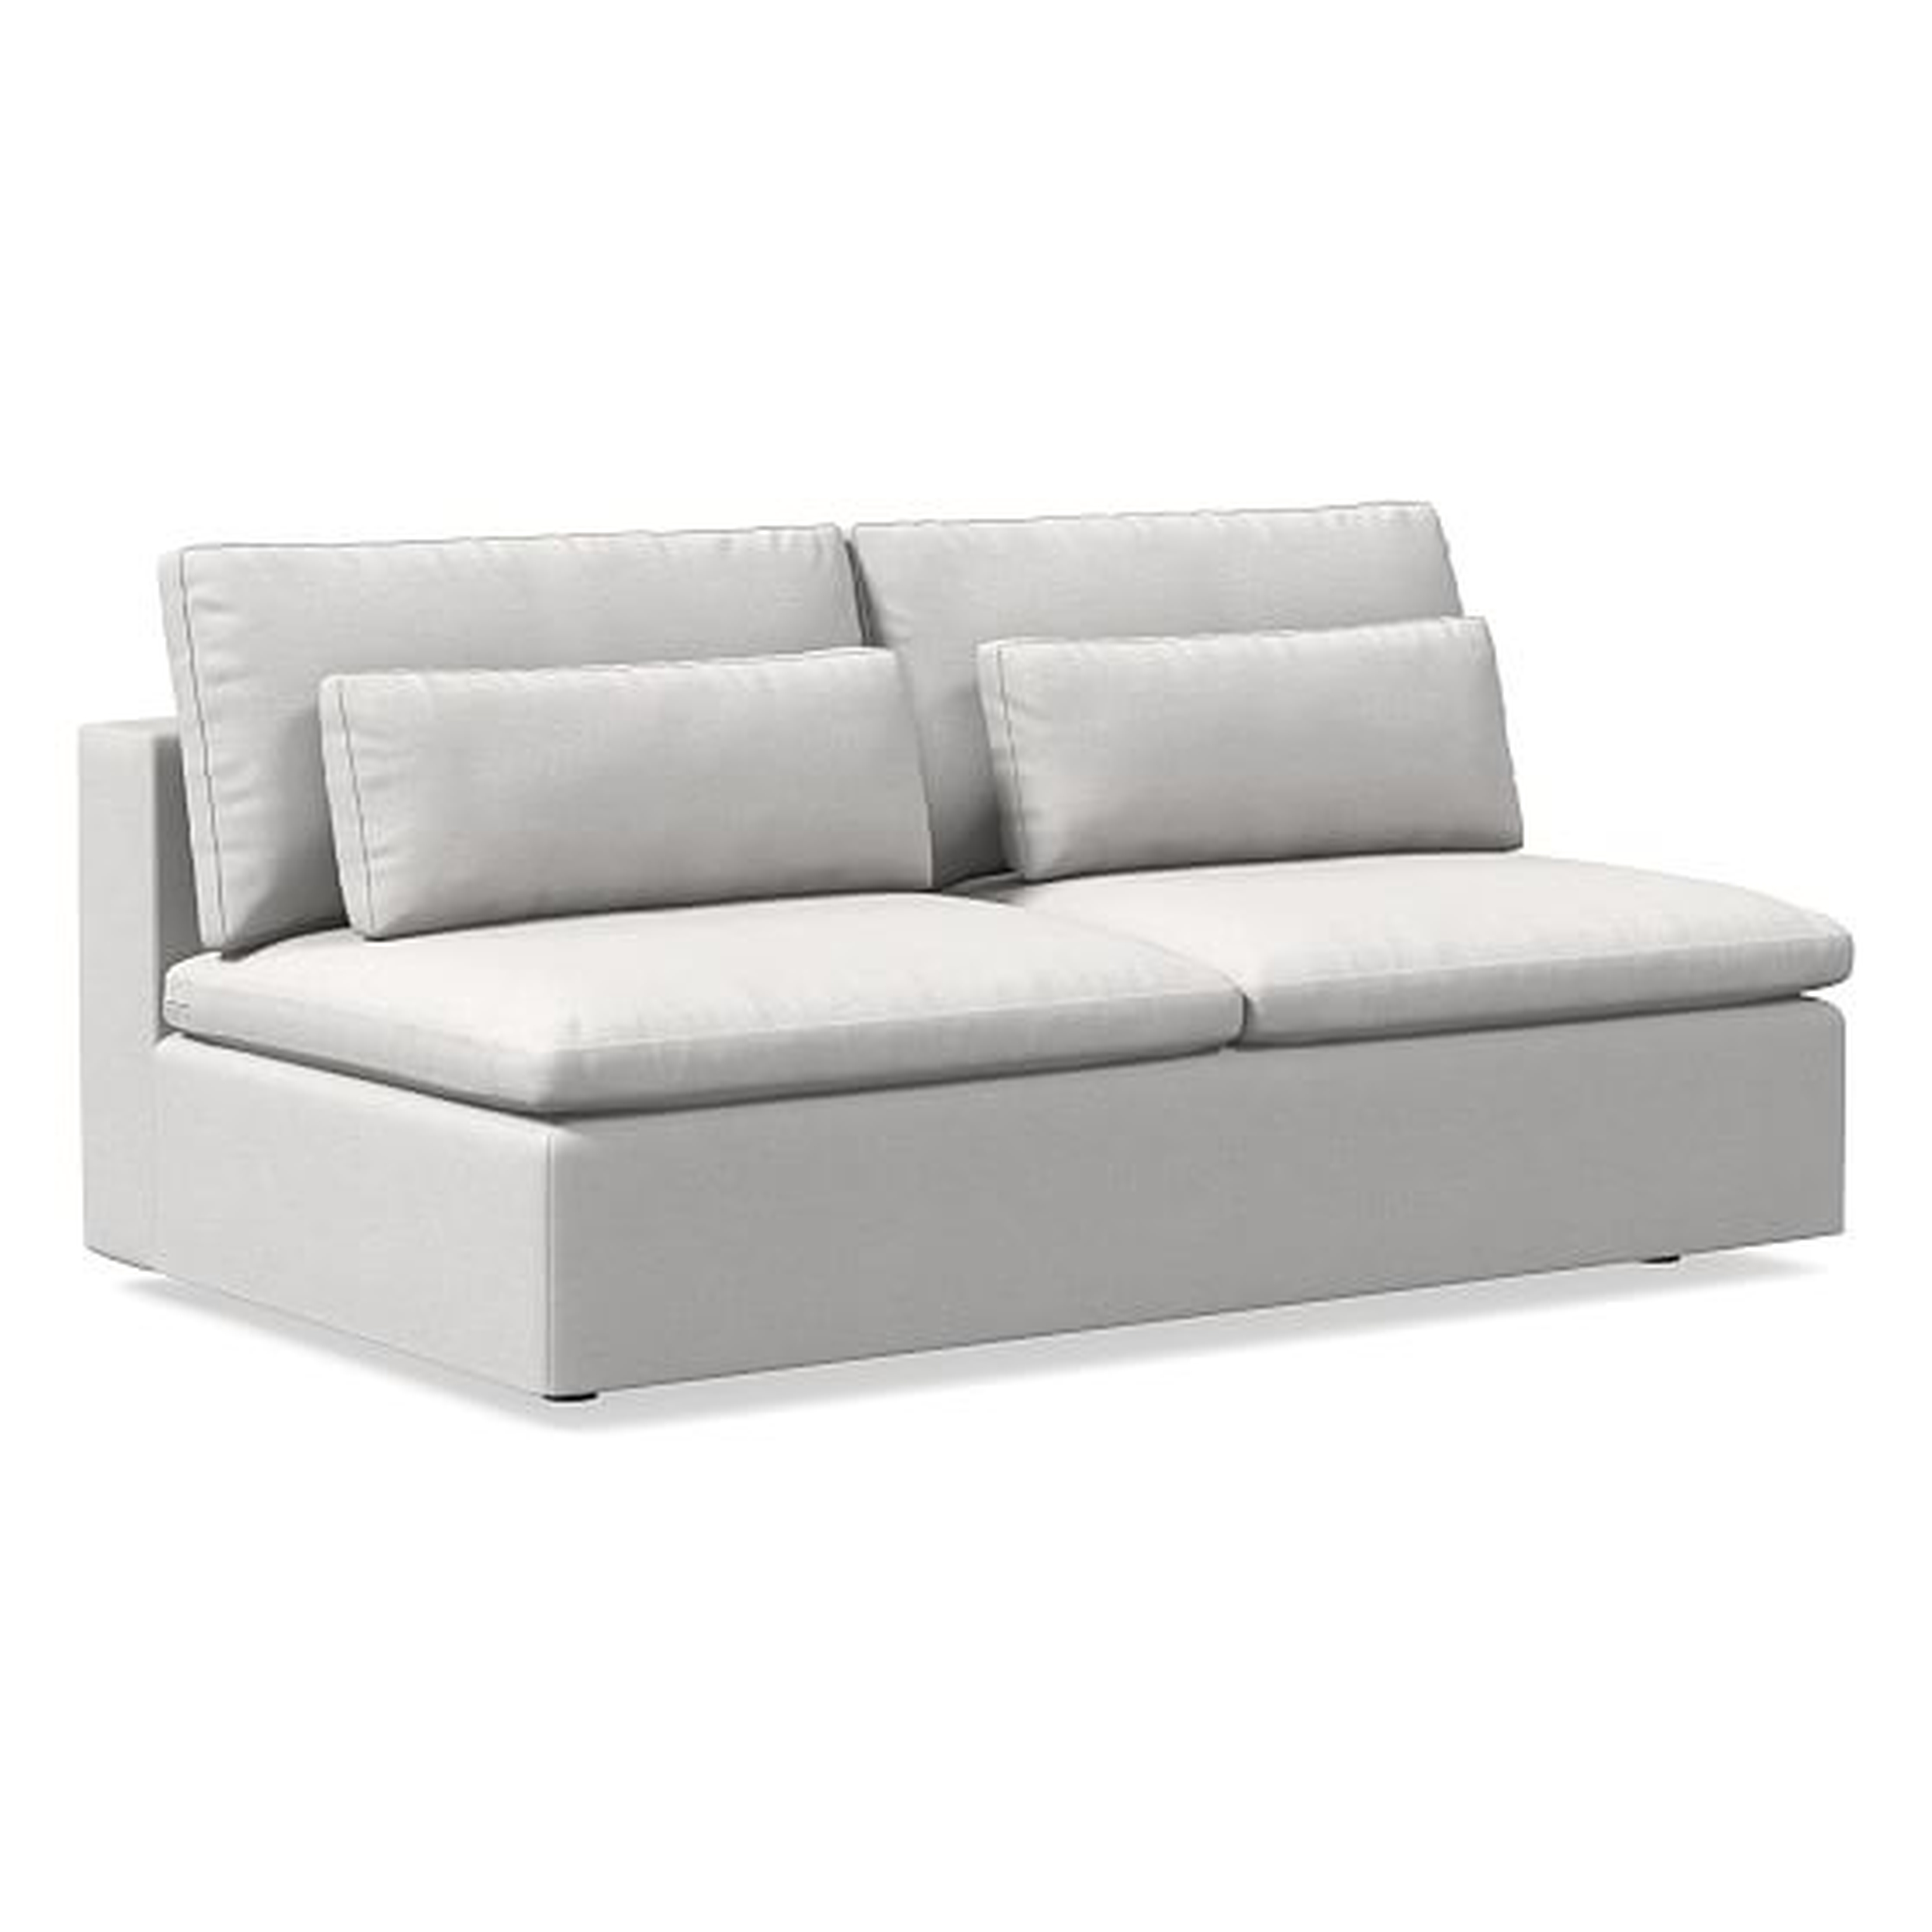 Harmony Modular Armless Double, Down, Eco Weave, Oyster, Concealed Supports - West Elm